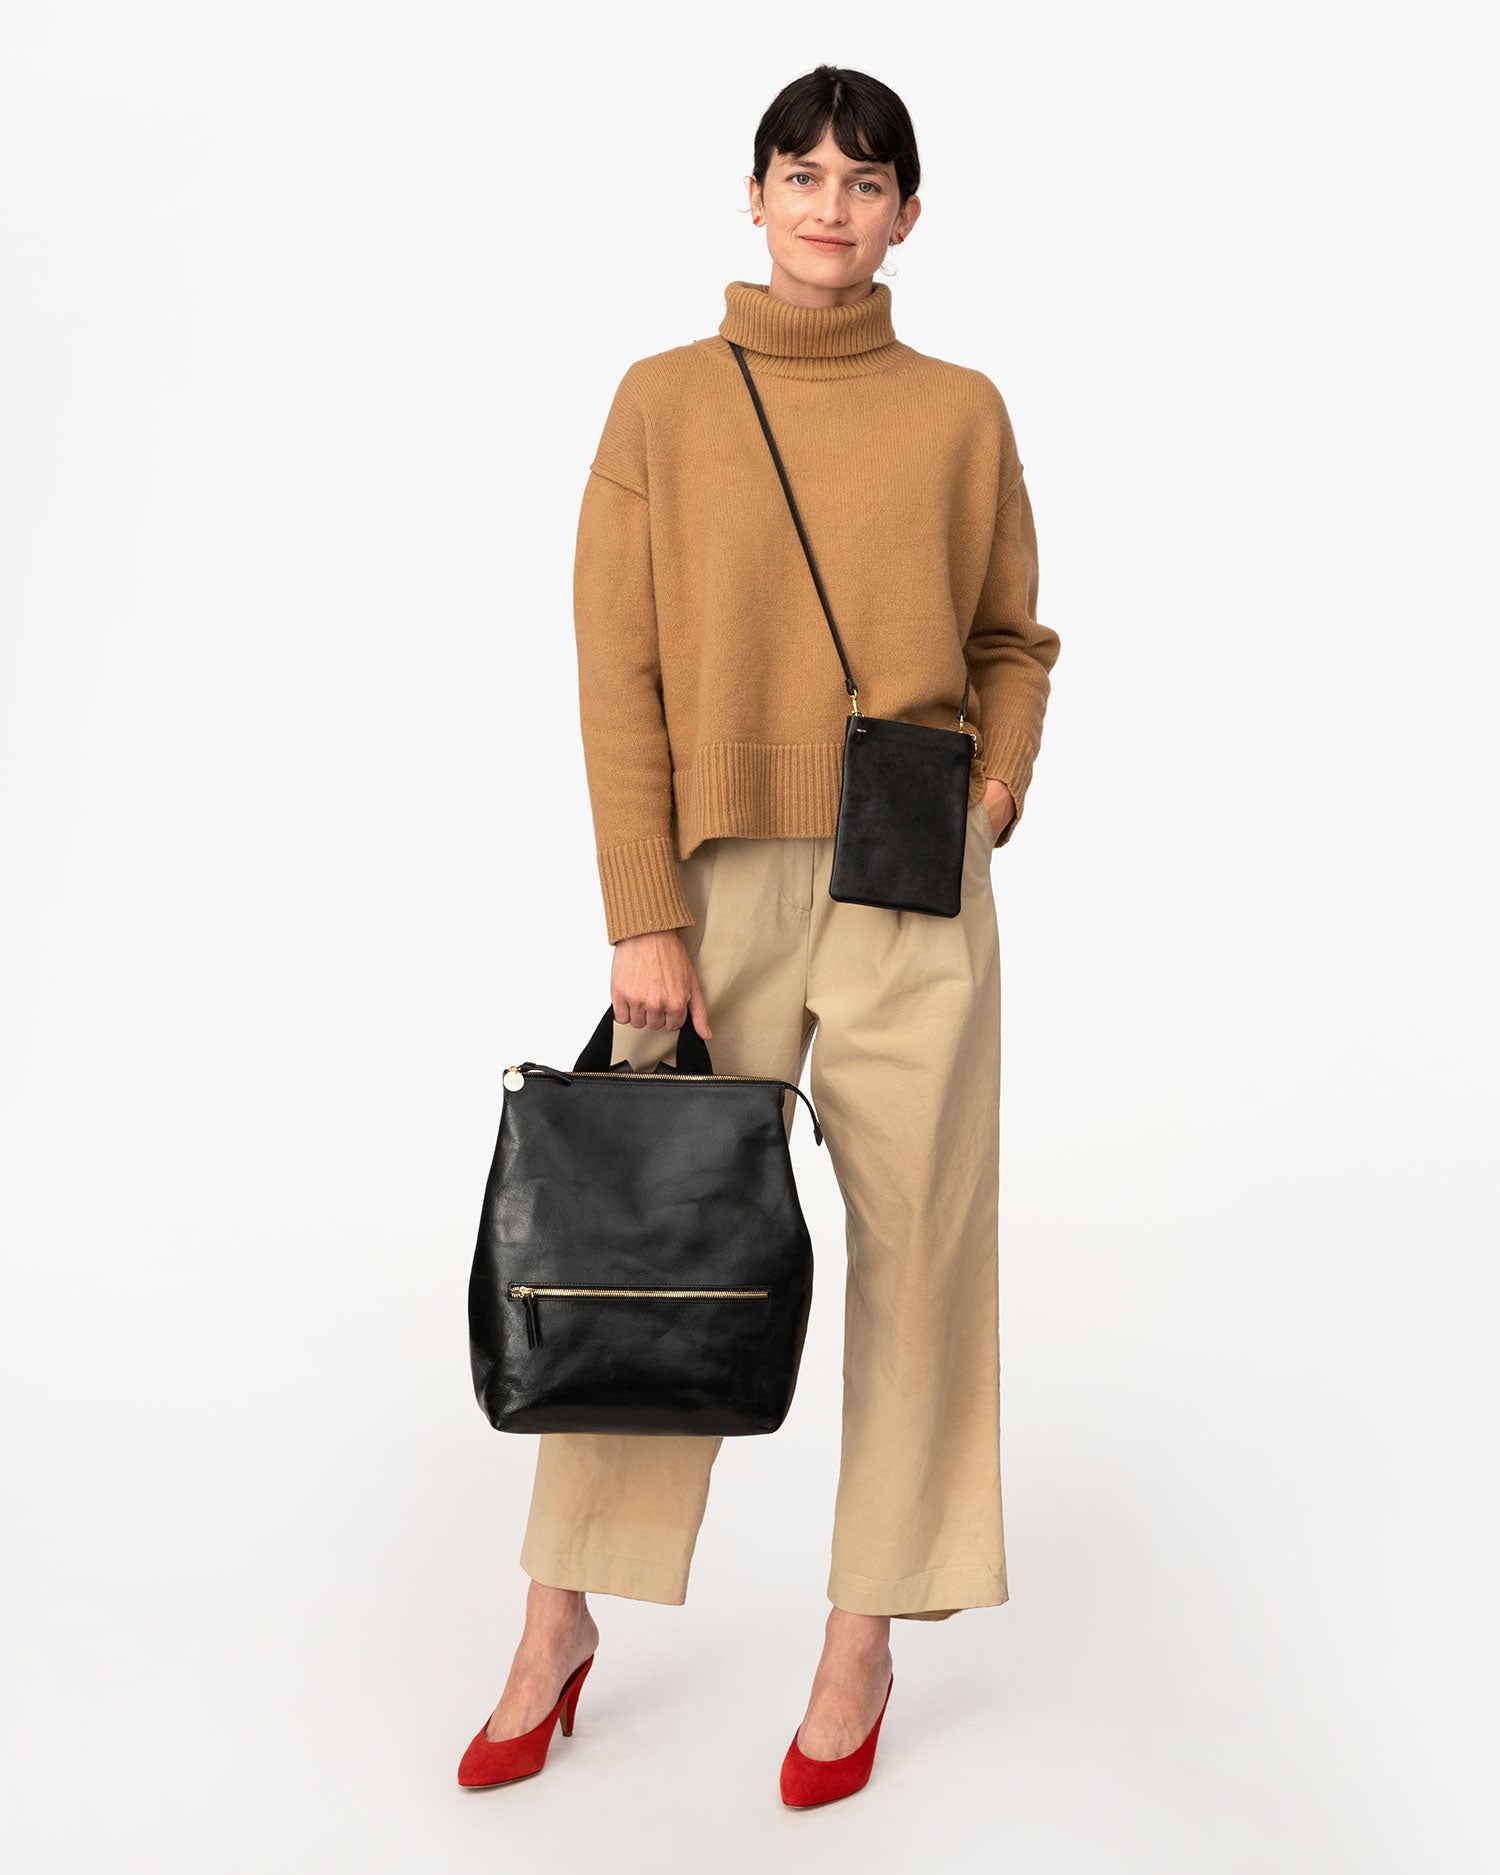 danica in an all tan outfit holding the Black Rustic Remi Backpack by its top handle with the black rustic poche worn crossbody